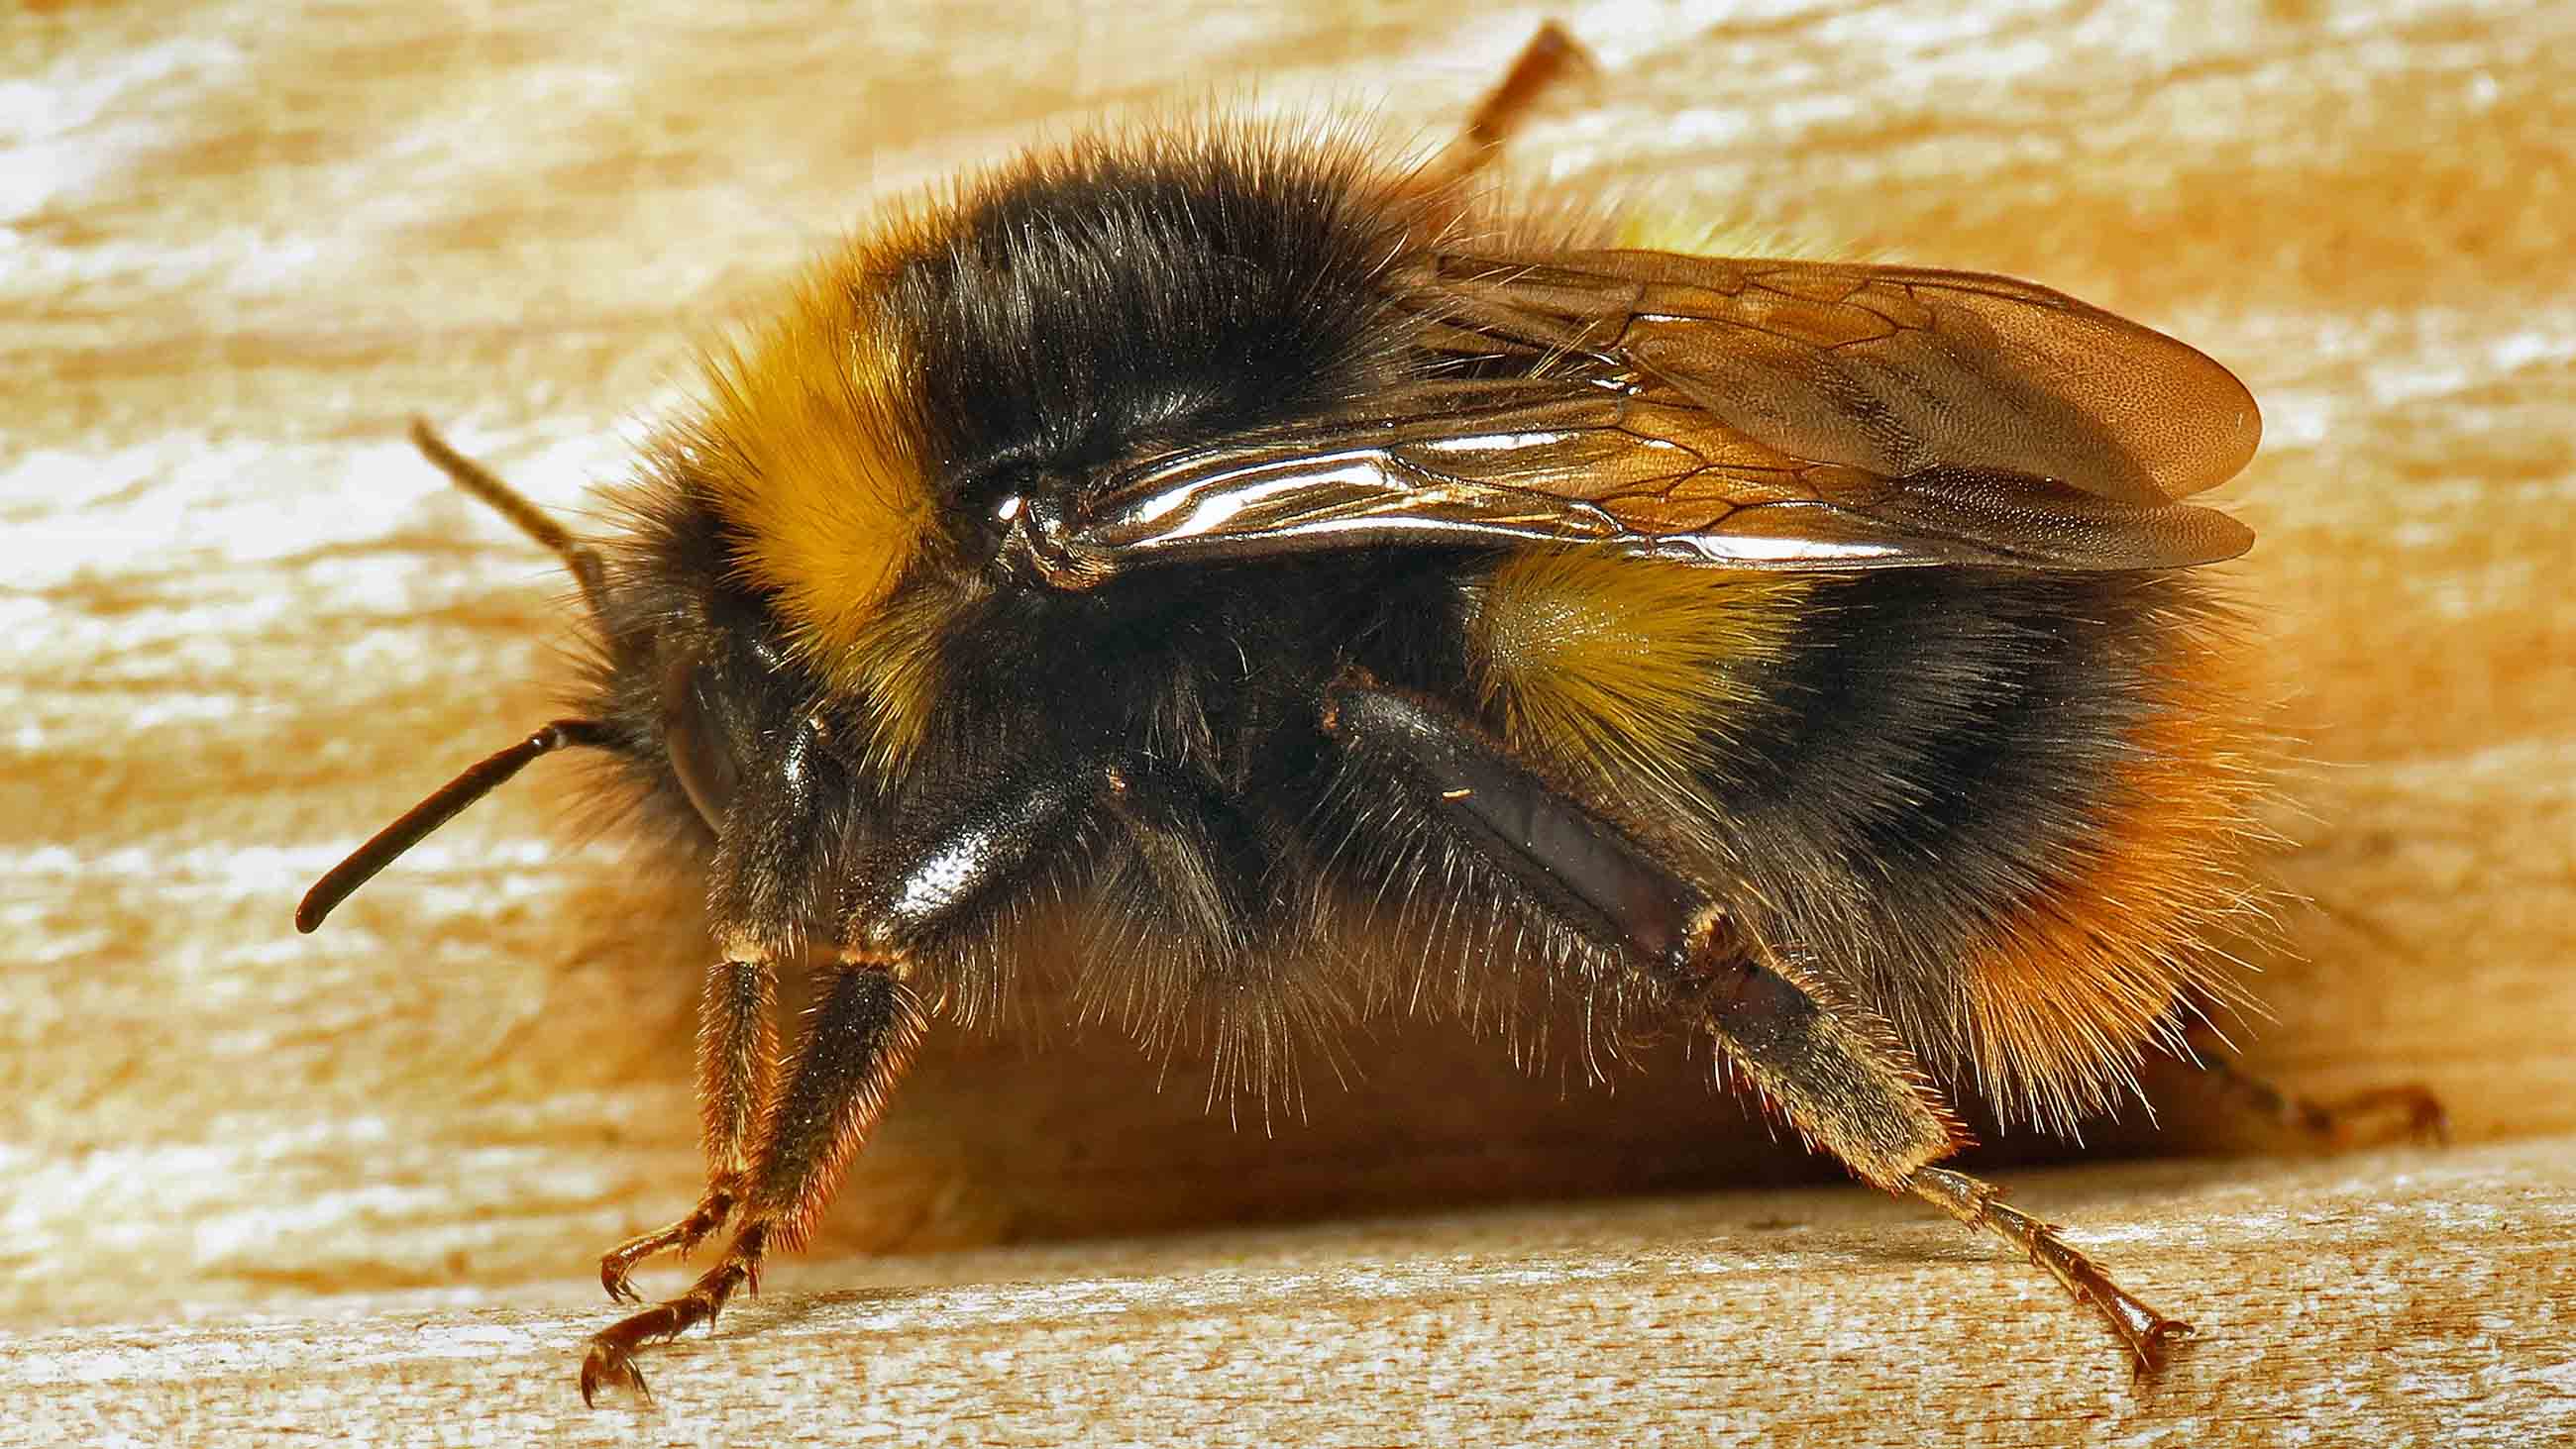 A team of scientists taught bumblebees how to play ball.